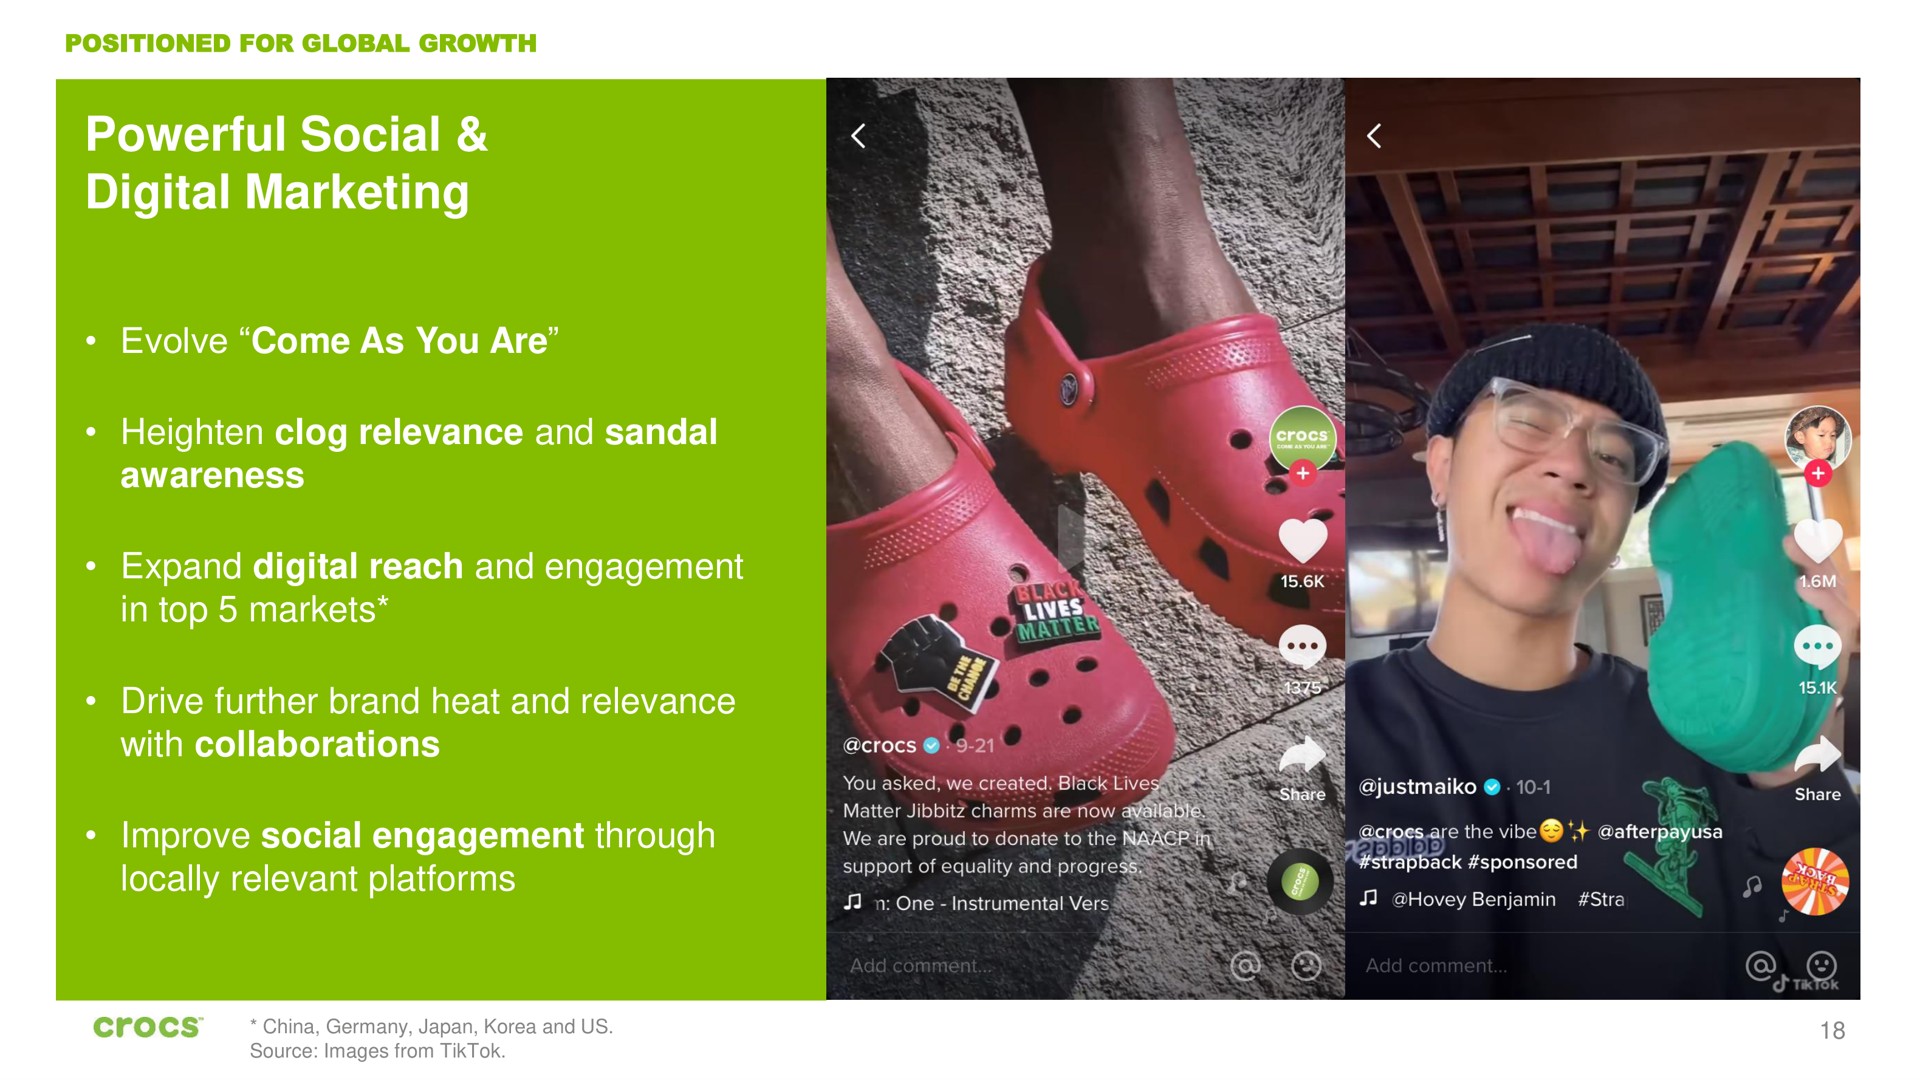 powerful social digital marketing evolve come as you are heighten clog relevance and sandal awareness expand digital reach and engagement in top markets drive further brand heat and relevance with collaborations improve social engagement through locally relevant platforms | Crocs